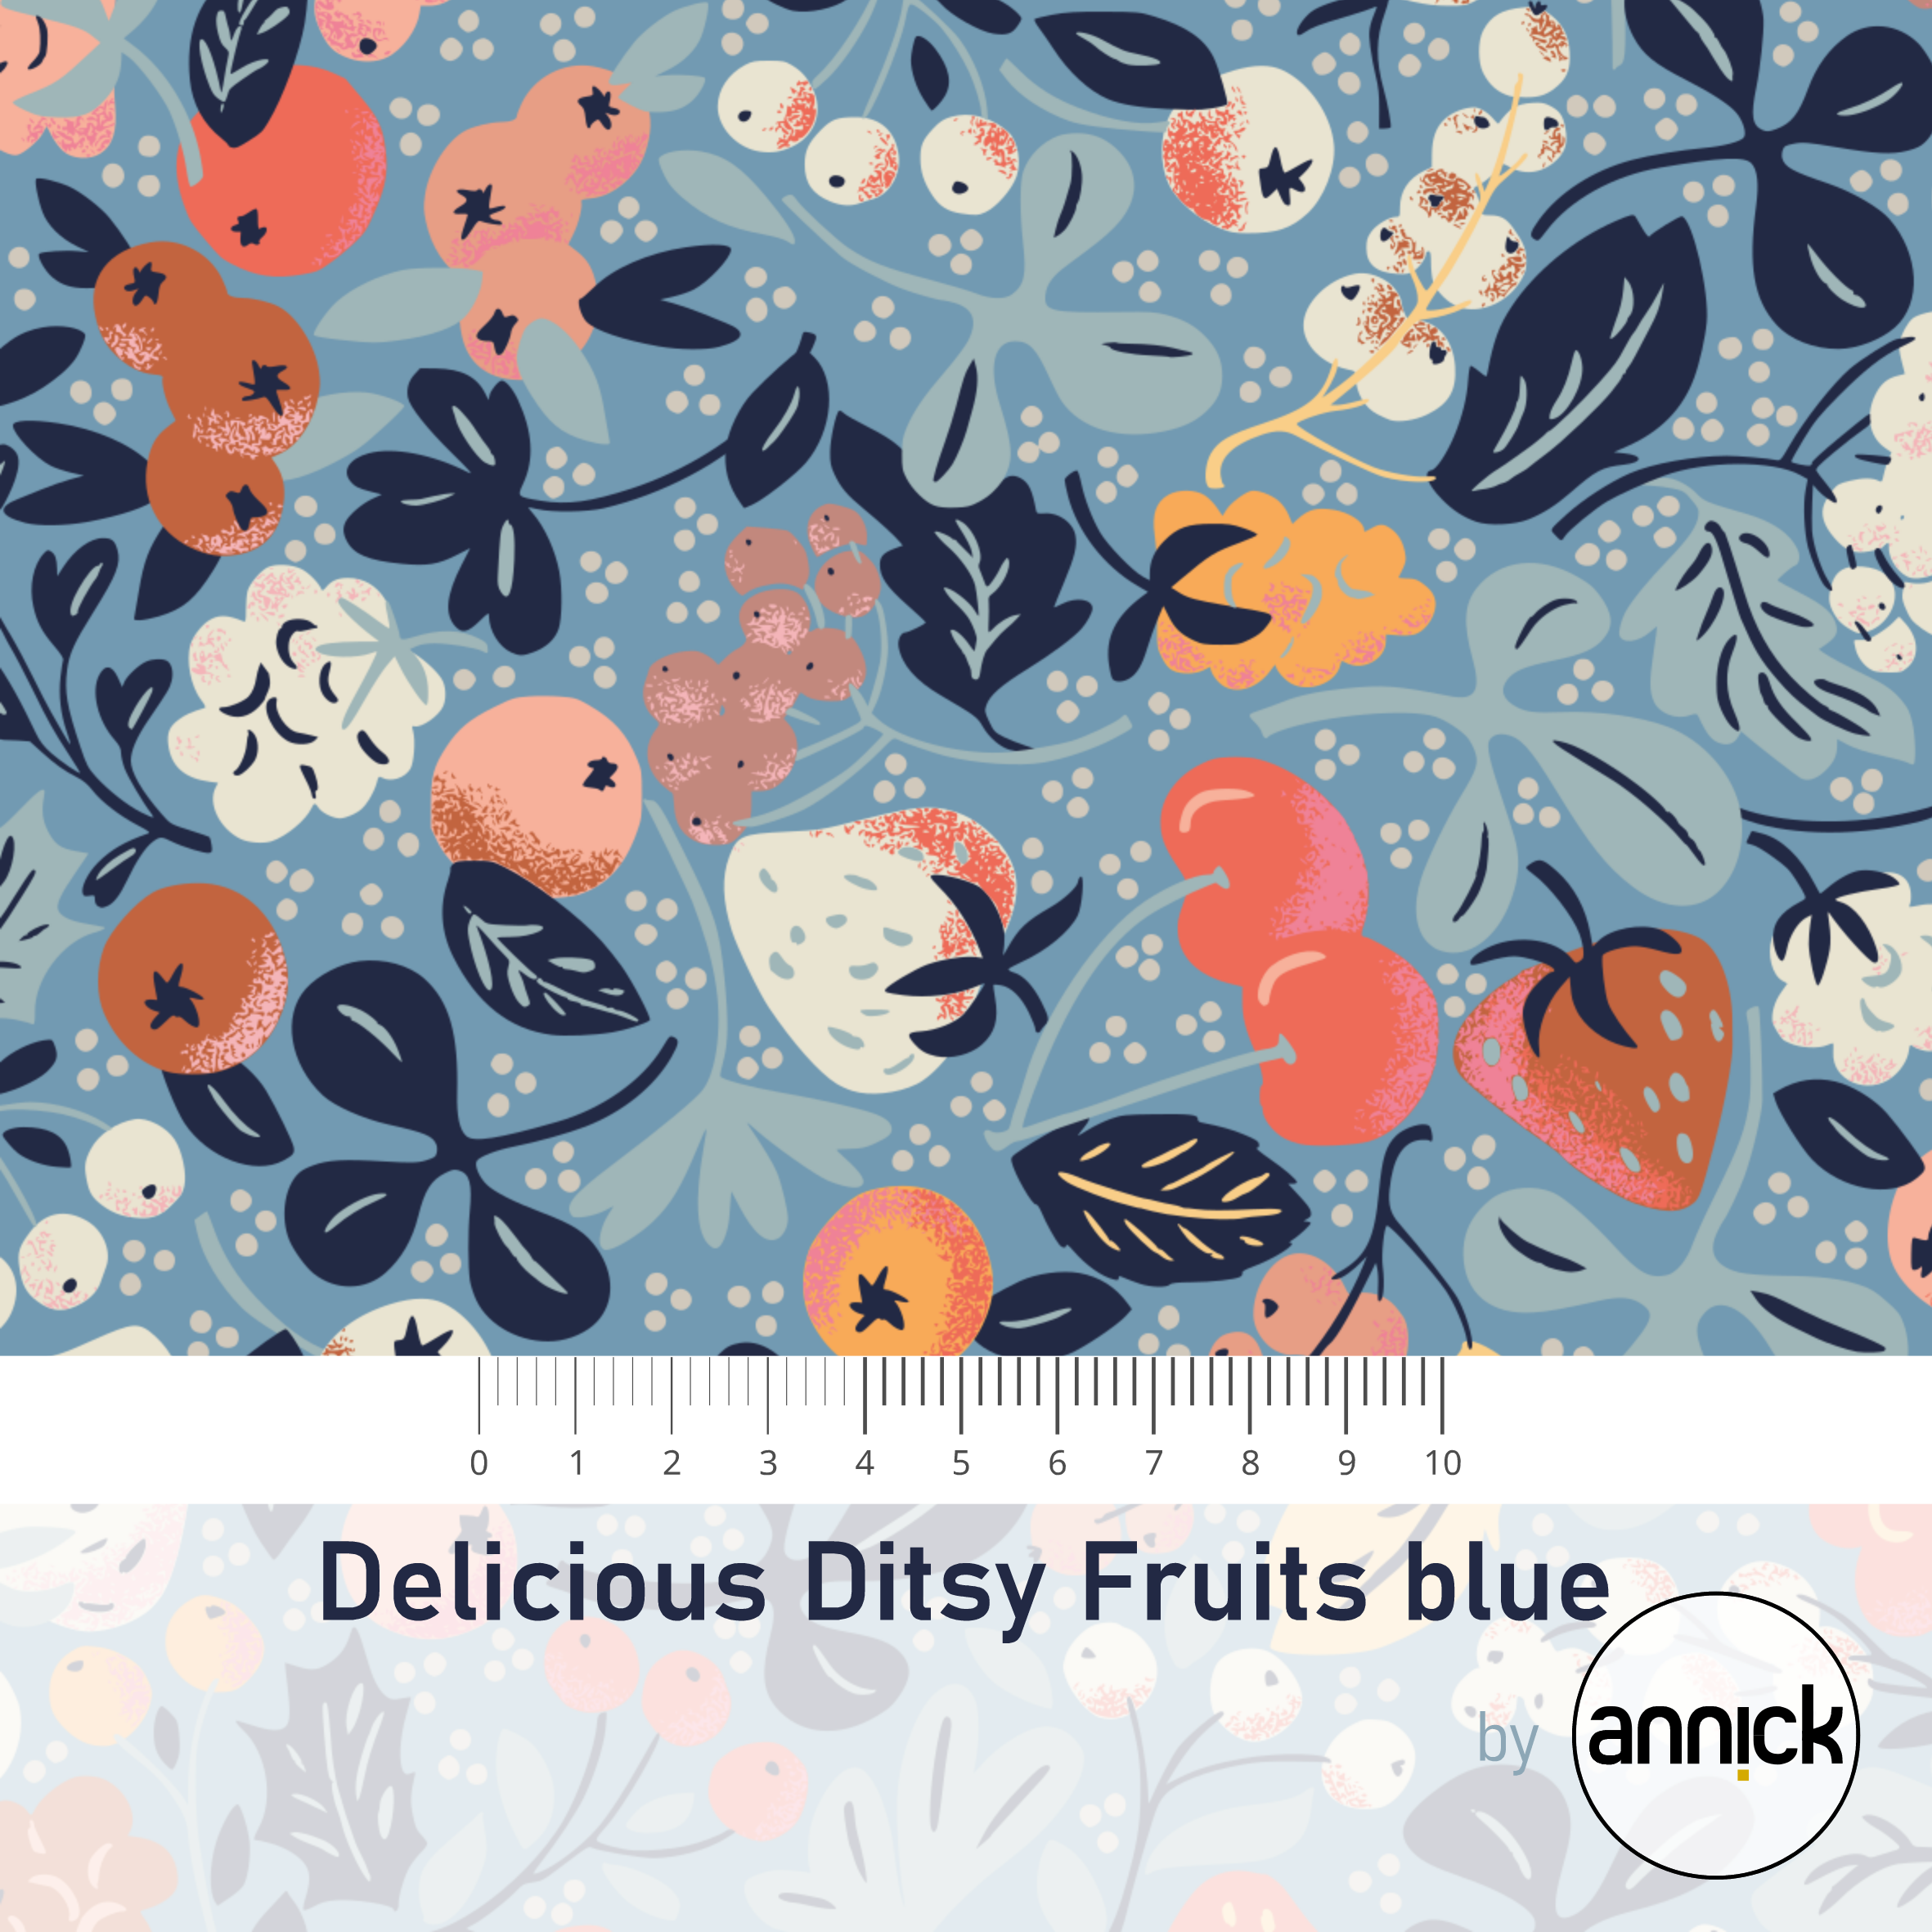 Delicious Ditsy Fruits blue